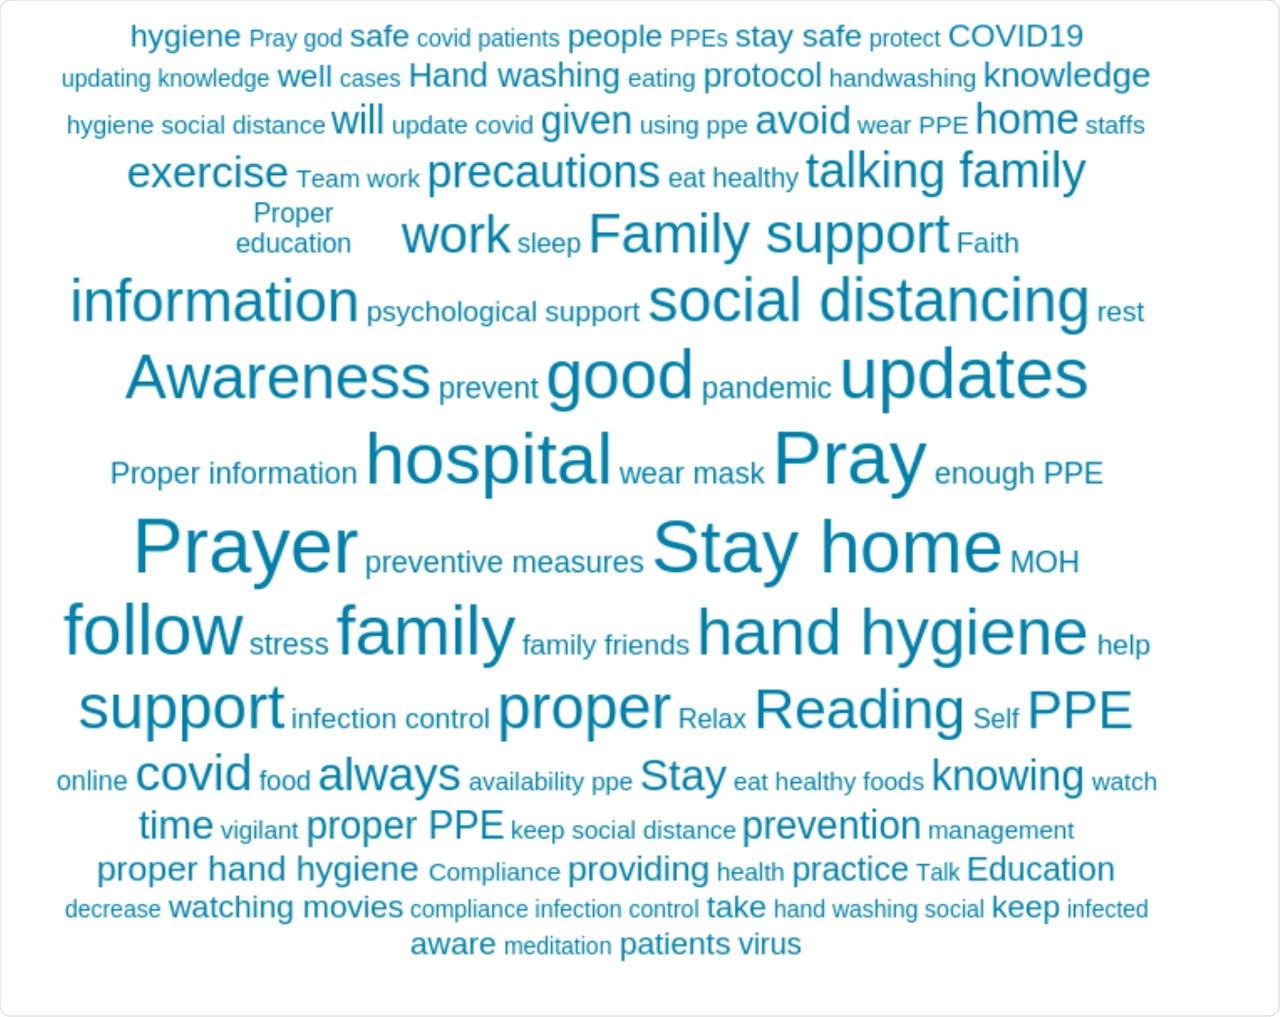 Study: Changes in healthcare workers’ knowledge, attitudes, practices, and stress during the COVID-19 pandemic.